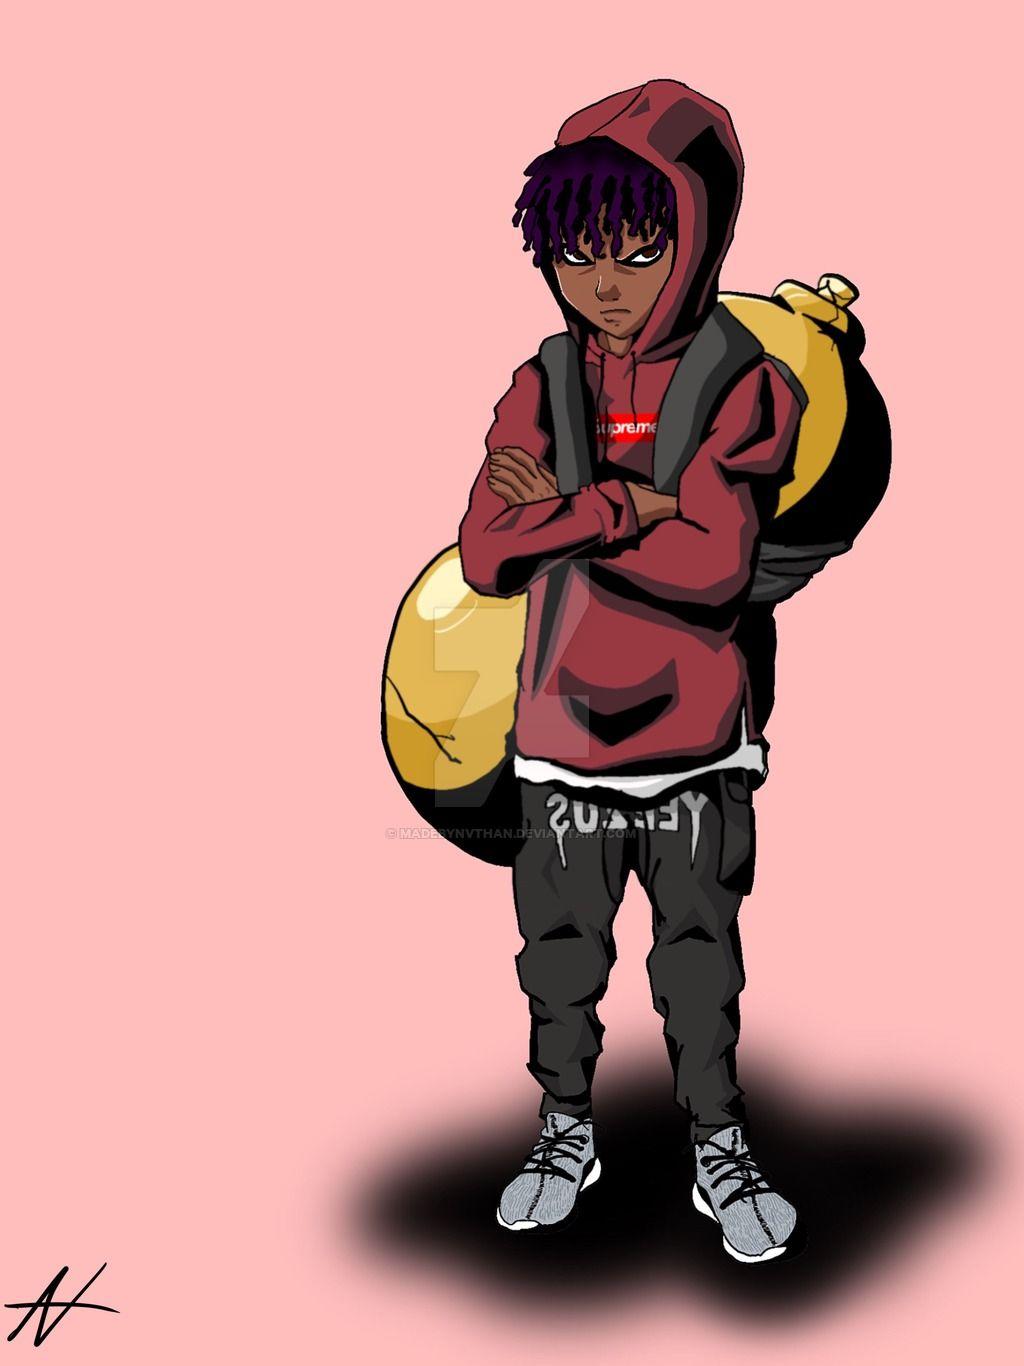 Anime Swag Boy #1 by Inesus9787 on DeviantArt